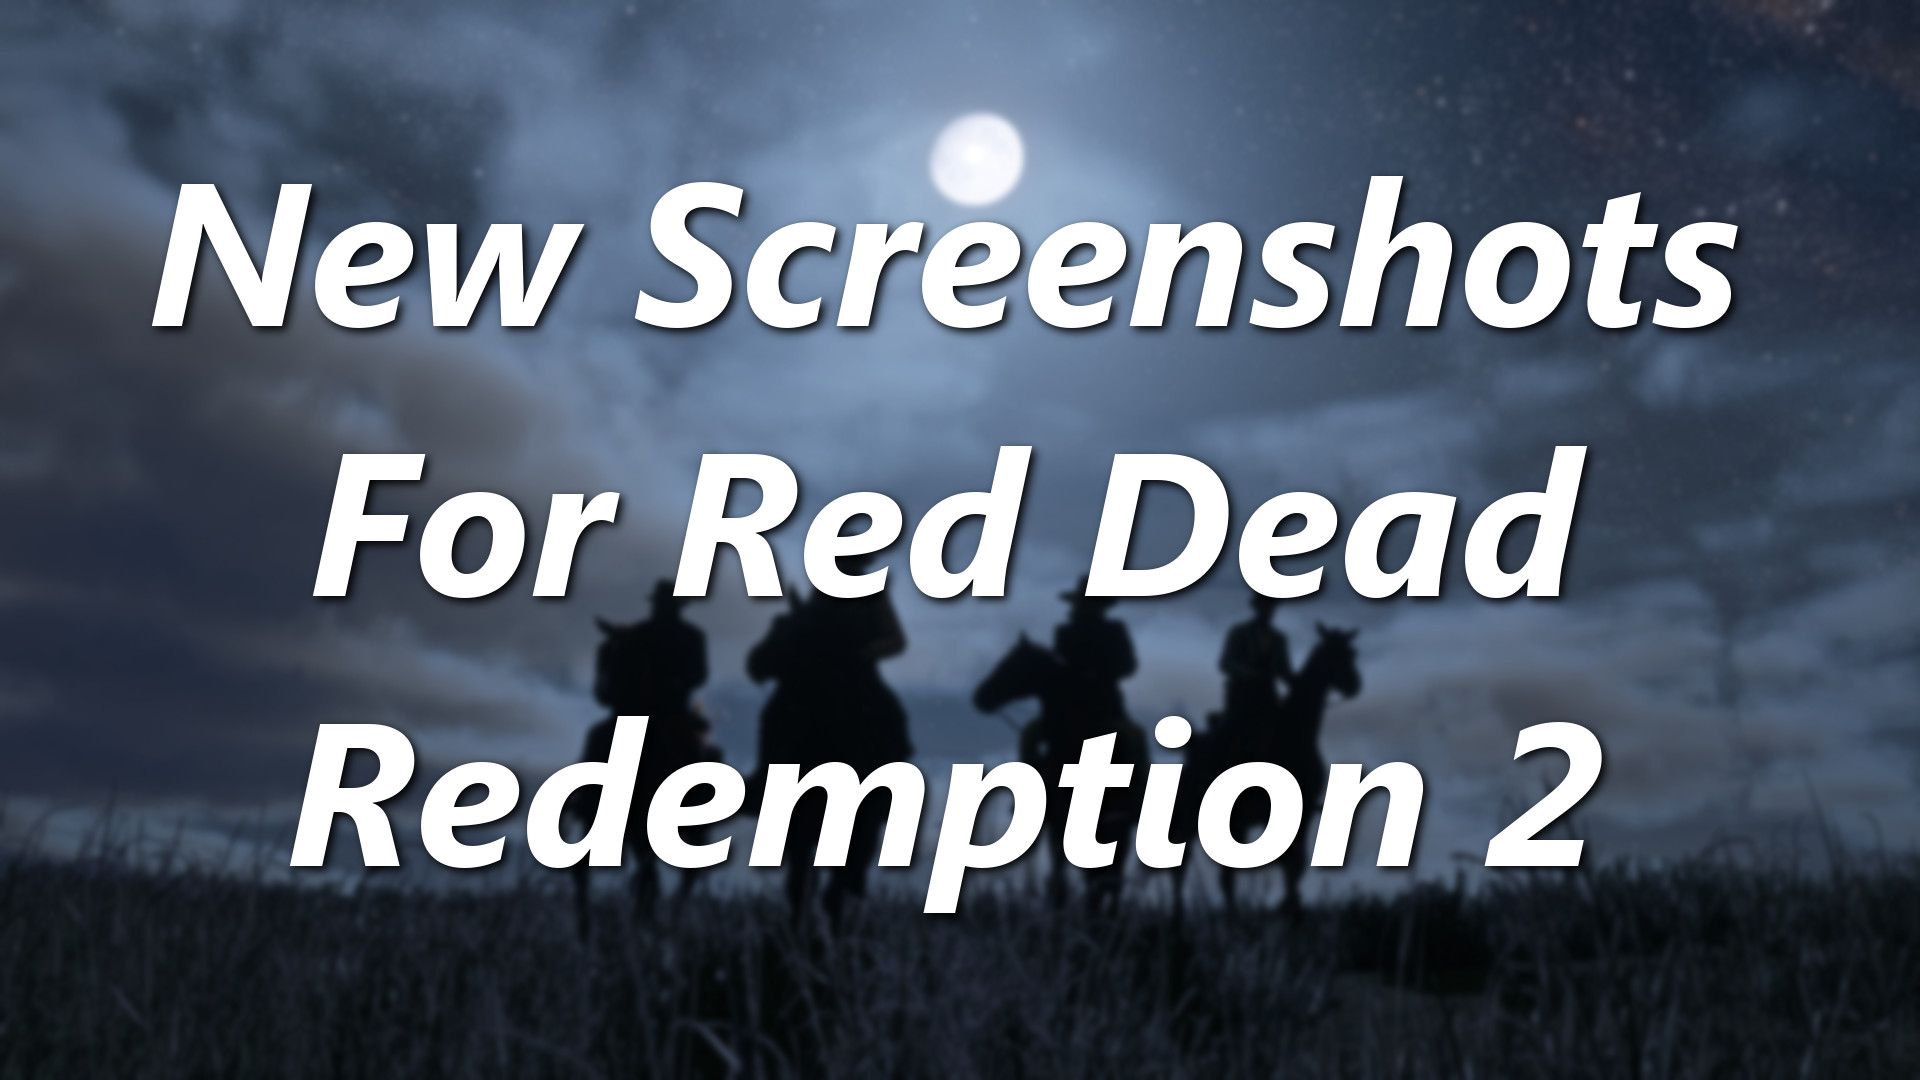 New Screenshots for Red Dead Redemption 2